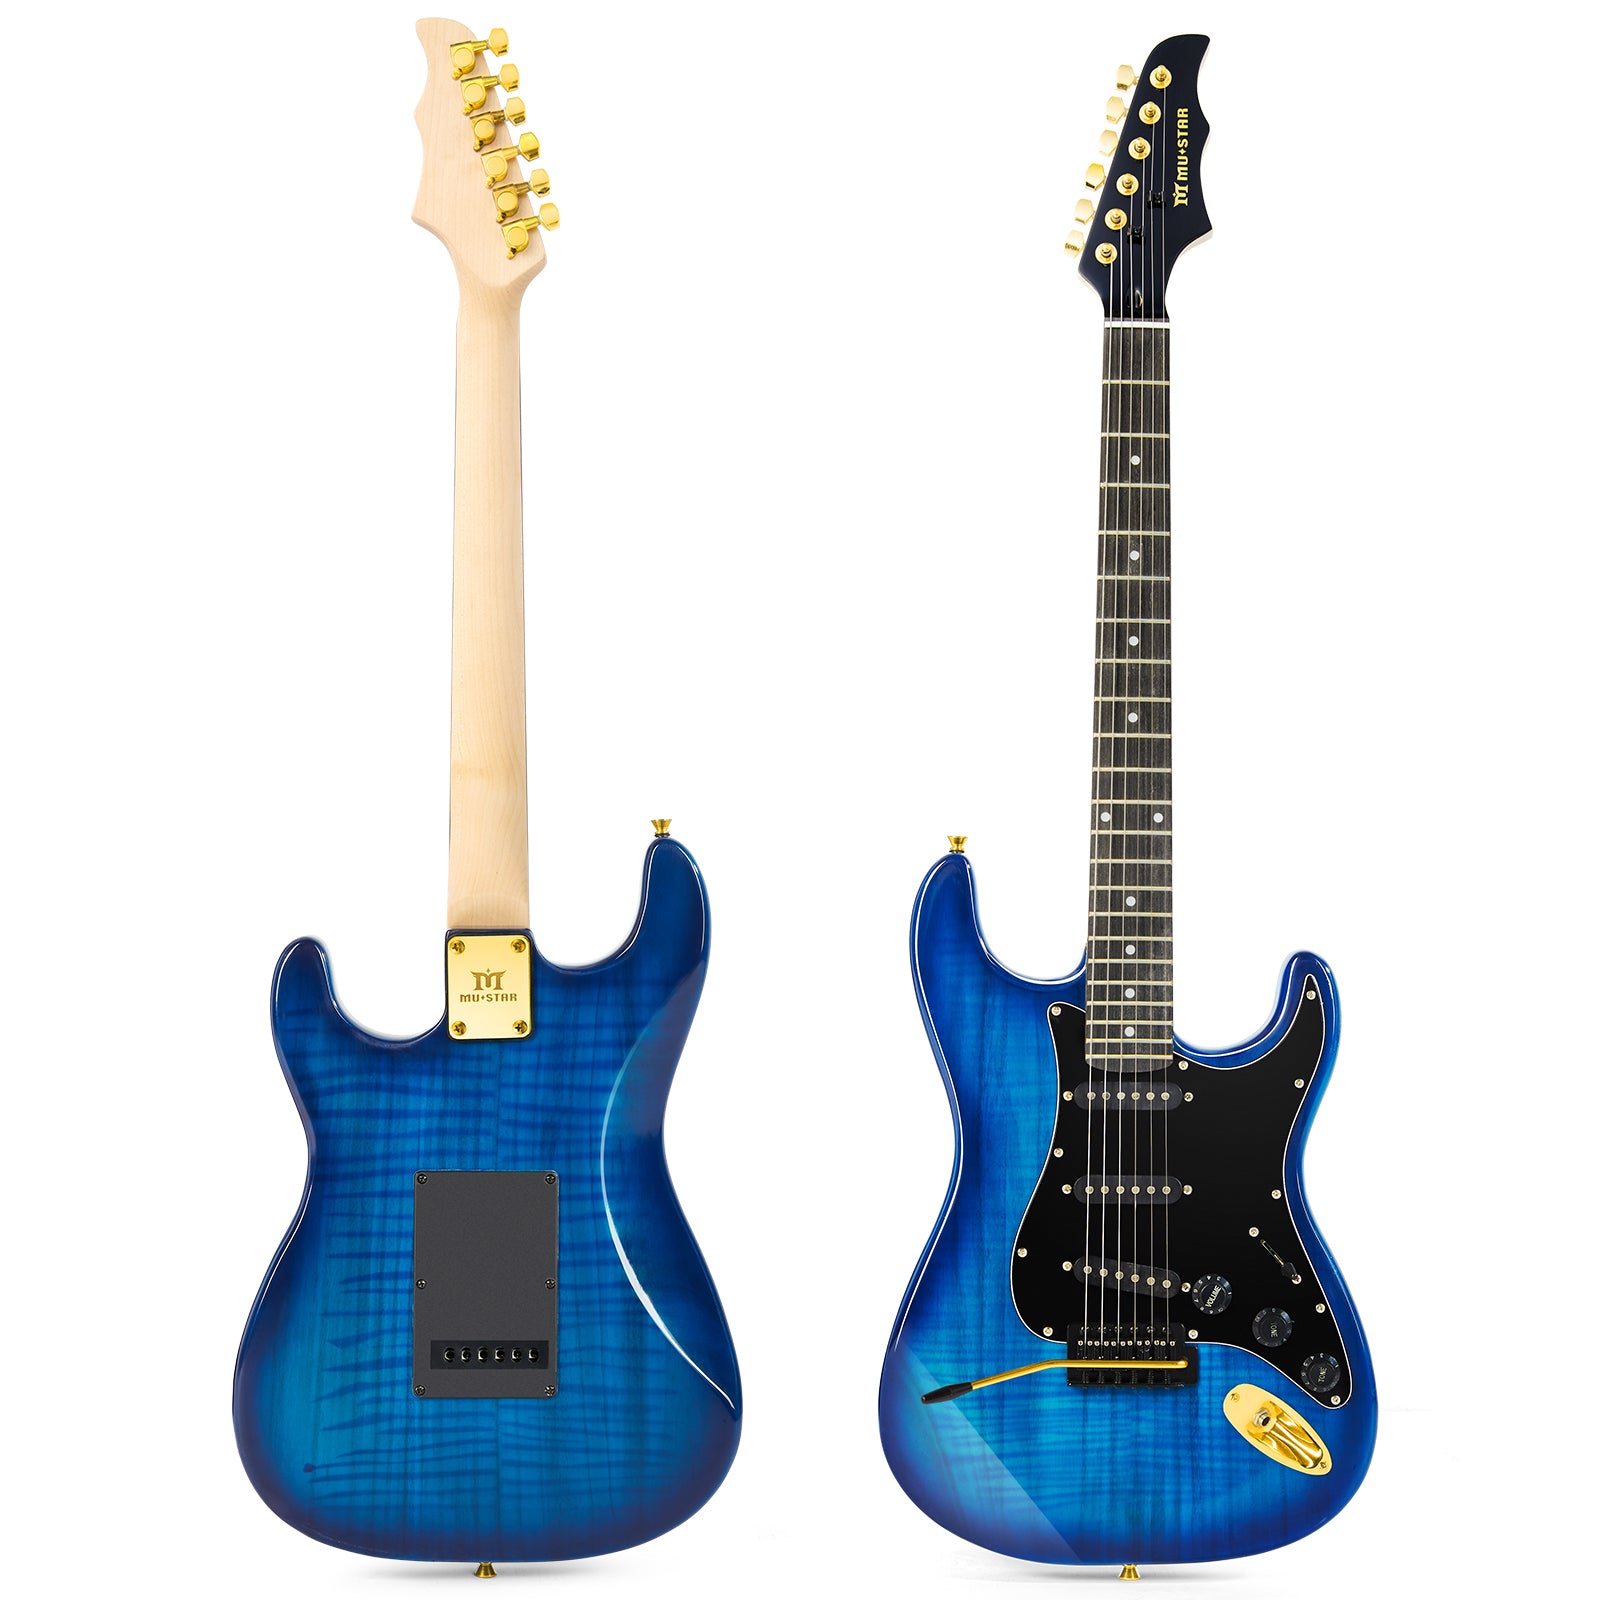 MUSTAR MEG-200, Electric Guitar Kit with 25W Amplifier, Solid Wood Electric Guitar Kits Beginner (Blue)